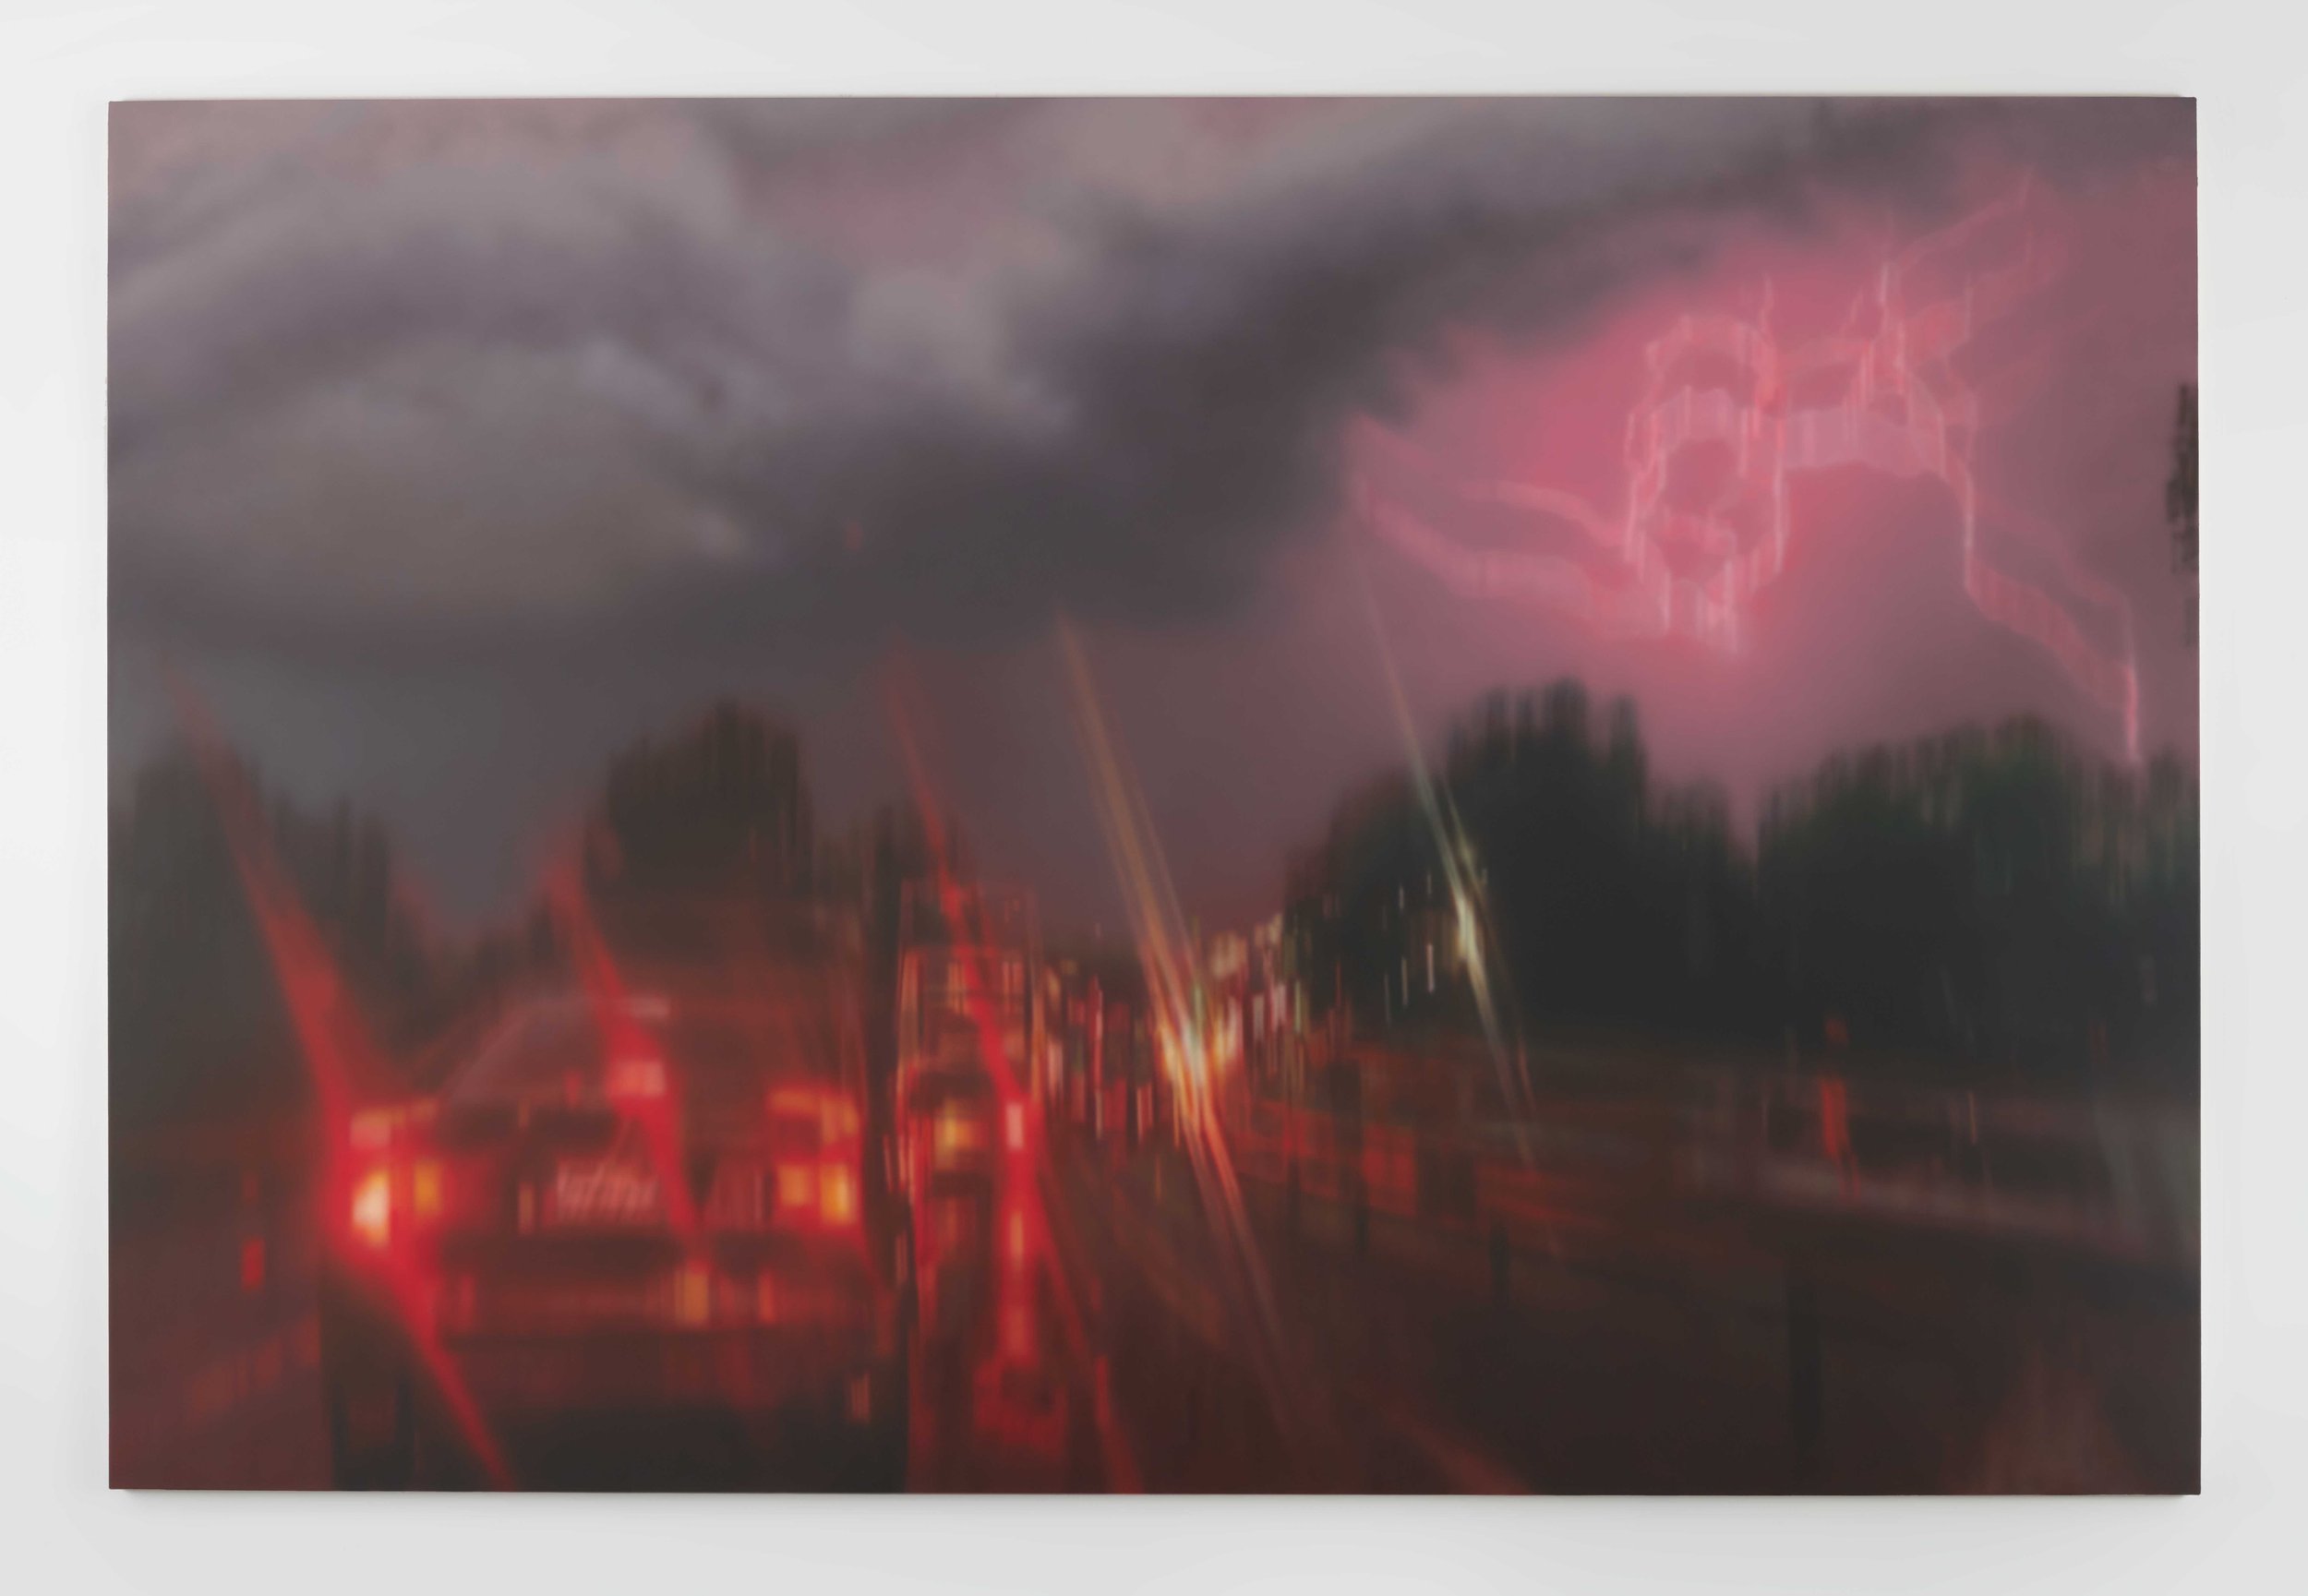   Traffic(ing) 2 , 2021. Acrylic on canvas. 96 x 144 inches  